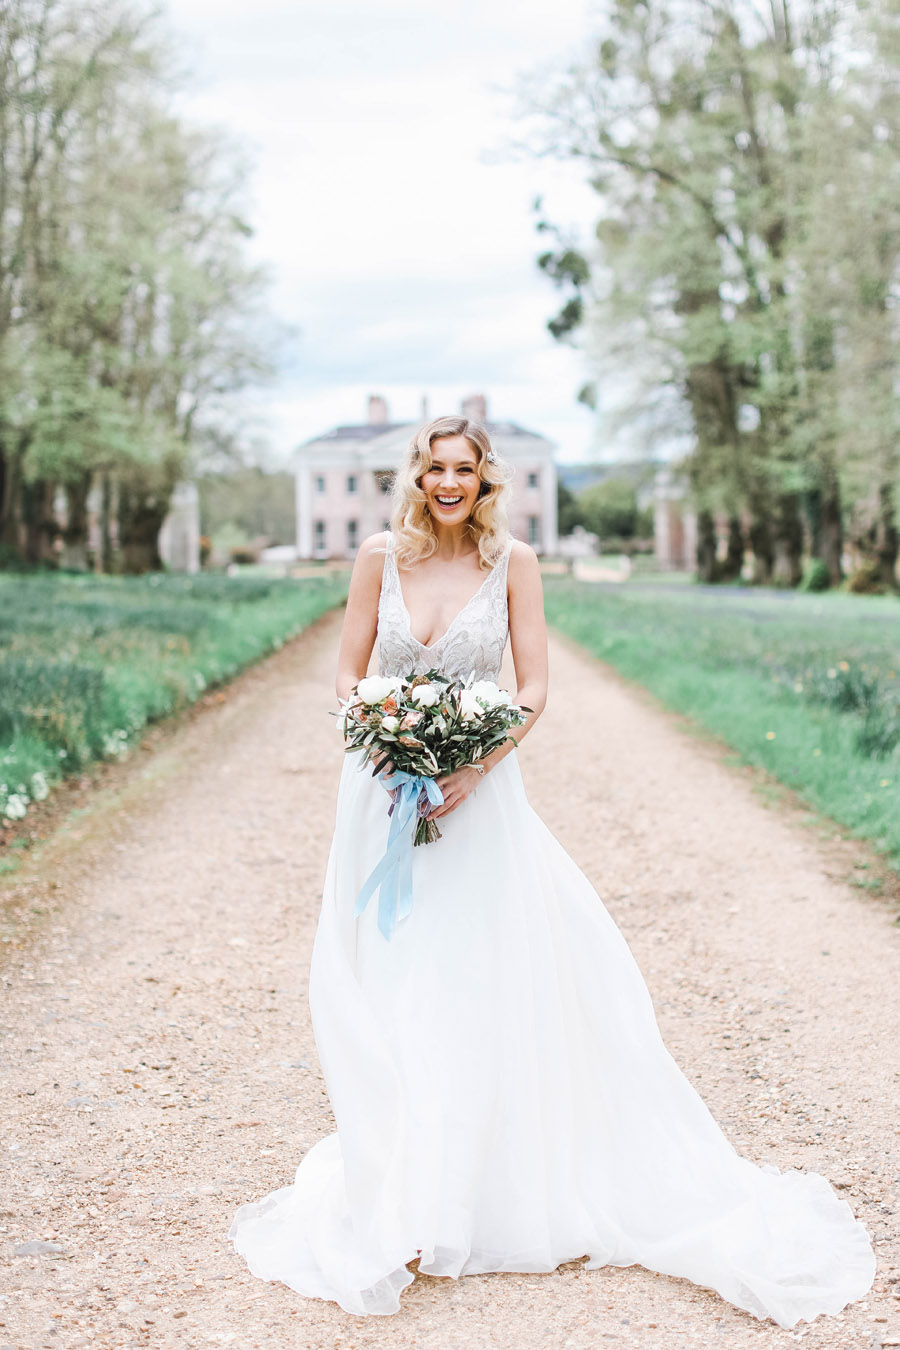 Romantic wedding ideas from Hale Park, photo by Charlotte Wise Photography (26)